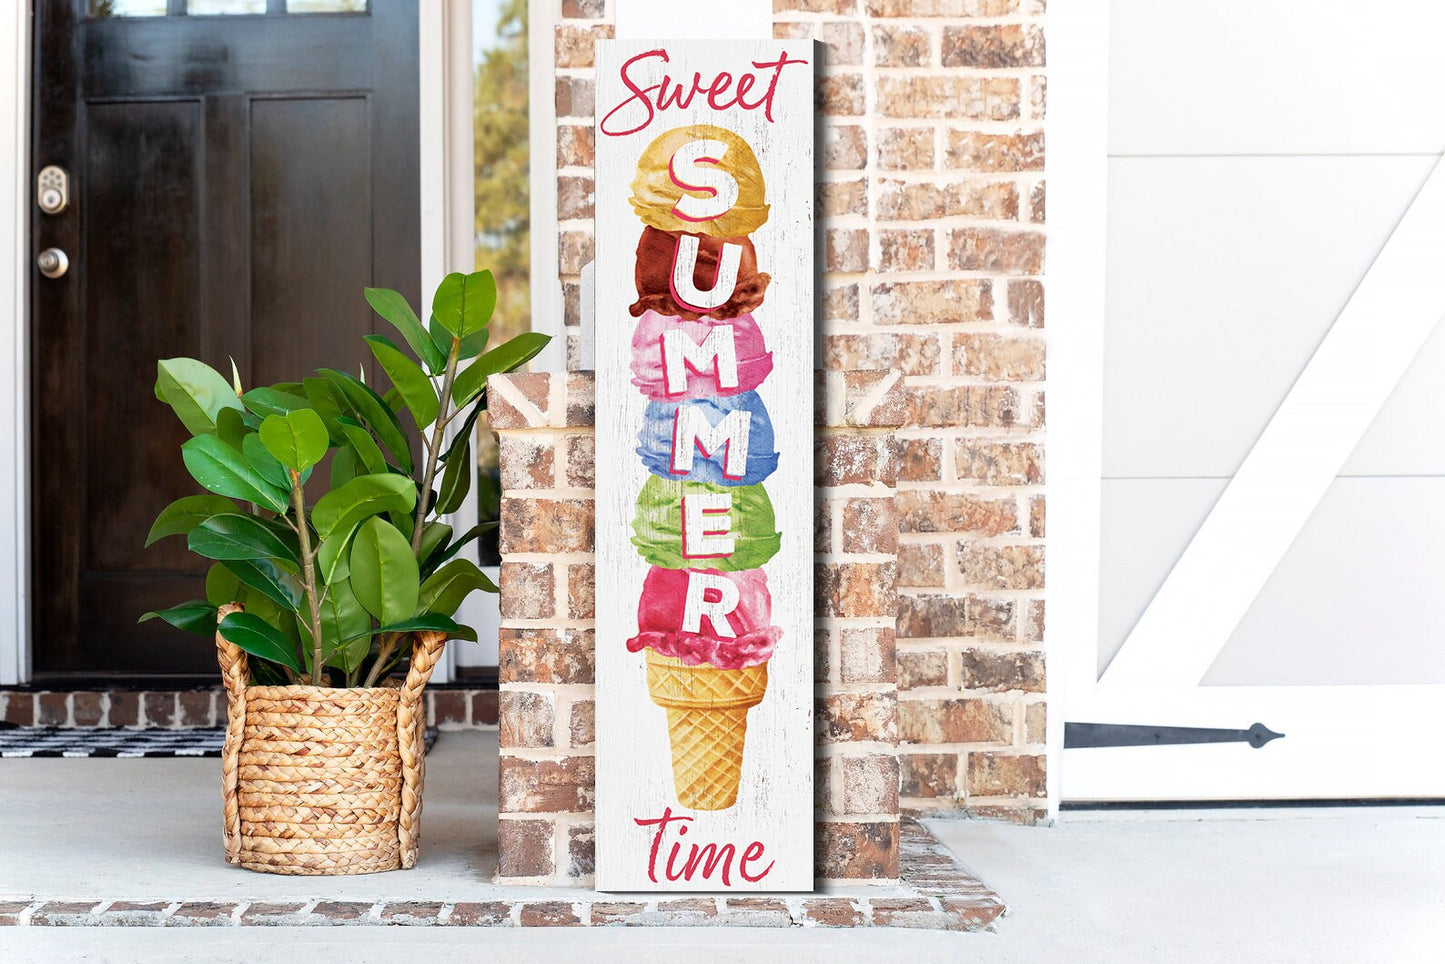 36in Sweet Summer Time Ice Cream Porch Sign - Wooden Front Door Wall Decor for Home - Fun & Colorful Seasonal Design